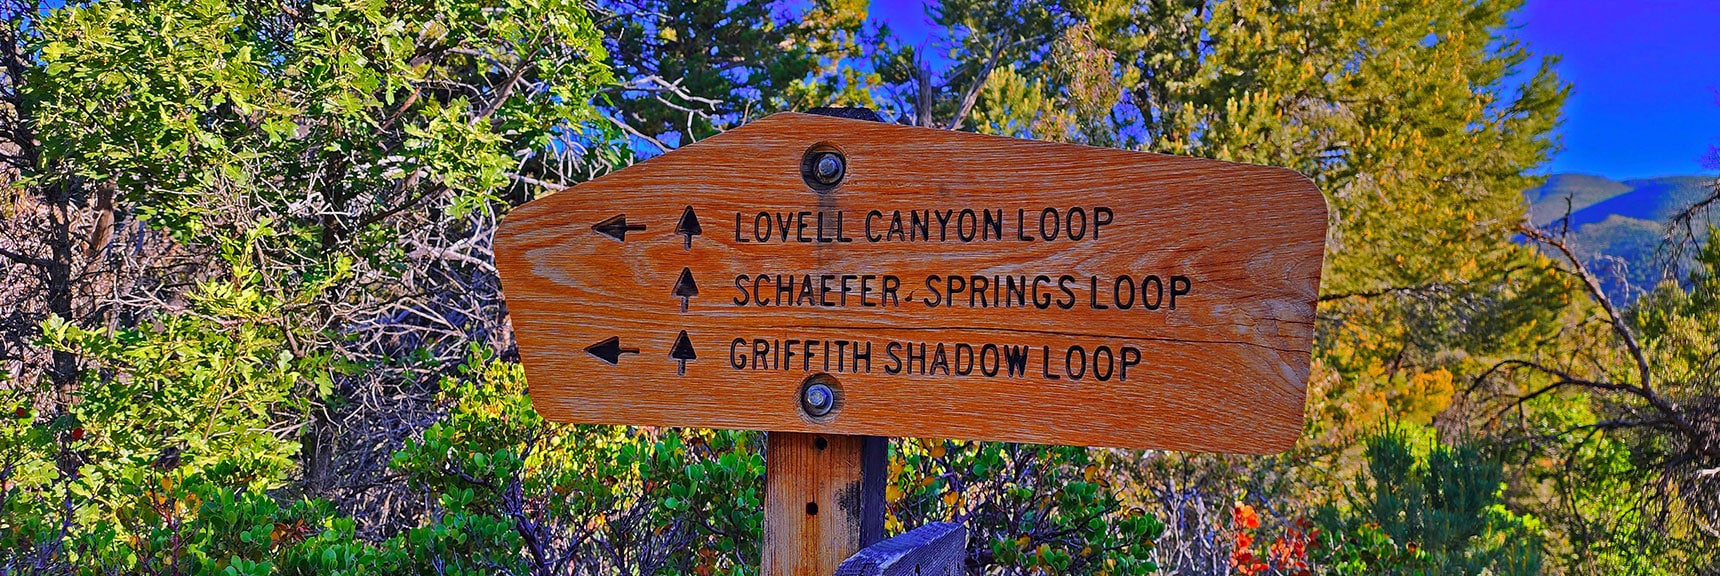 Trail Choices Accessed from Lovell Canyon Loop | Lovell Canyon Loop Trail | Lovell Canyon Nevada